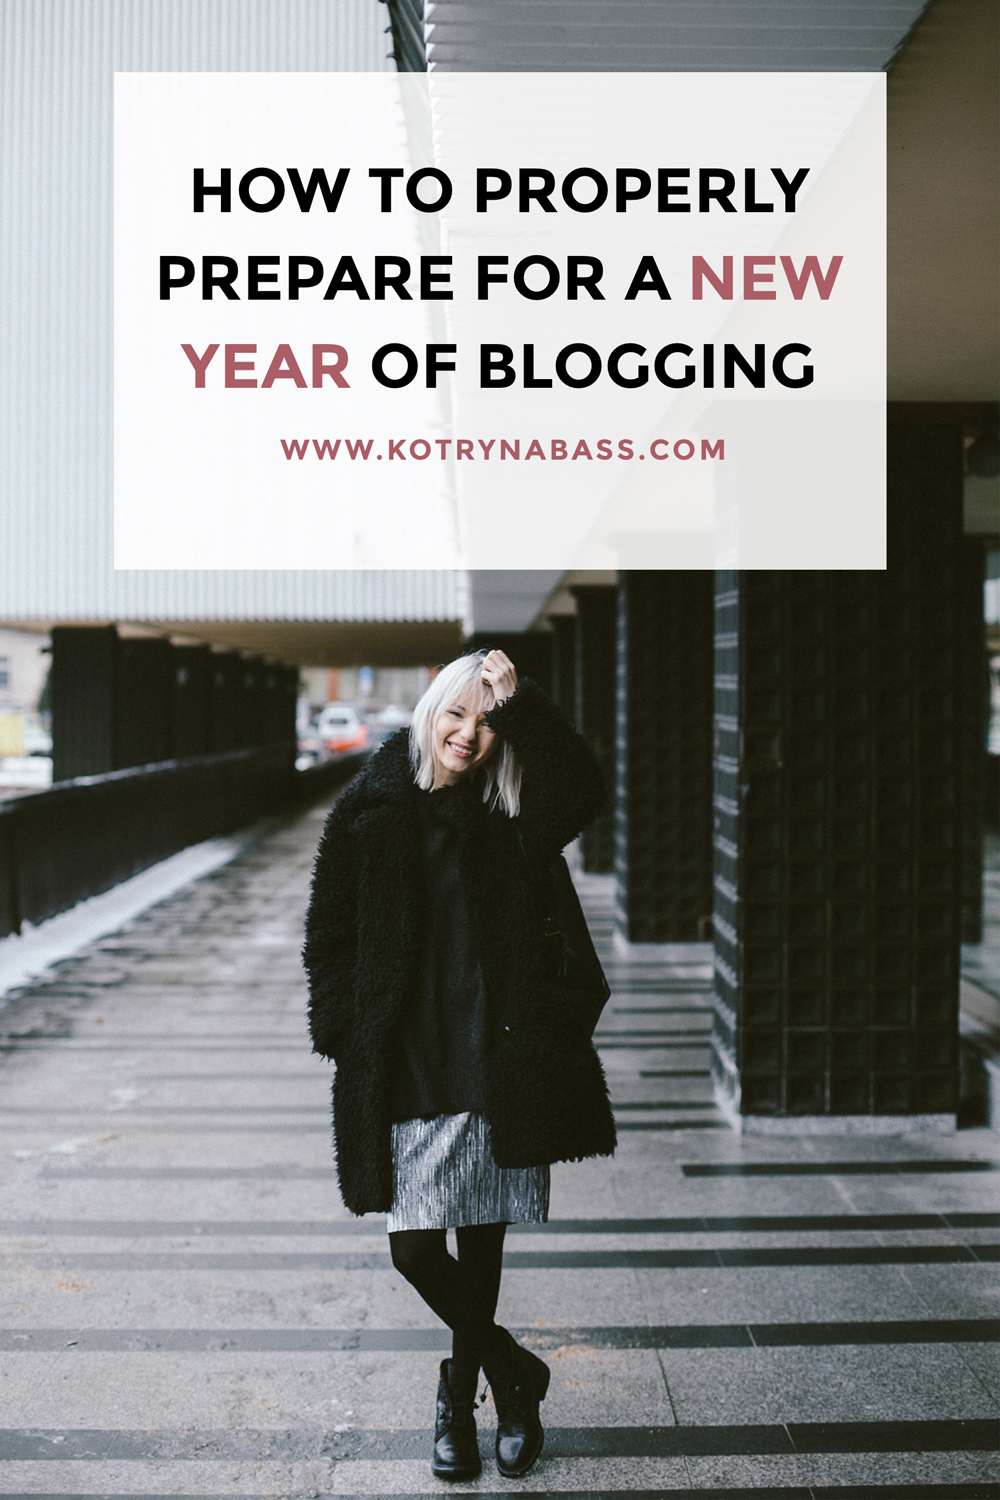 Blogging Tips For Preparing Your Blog For A New Year